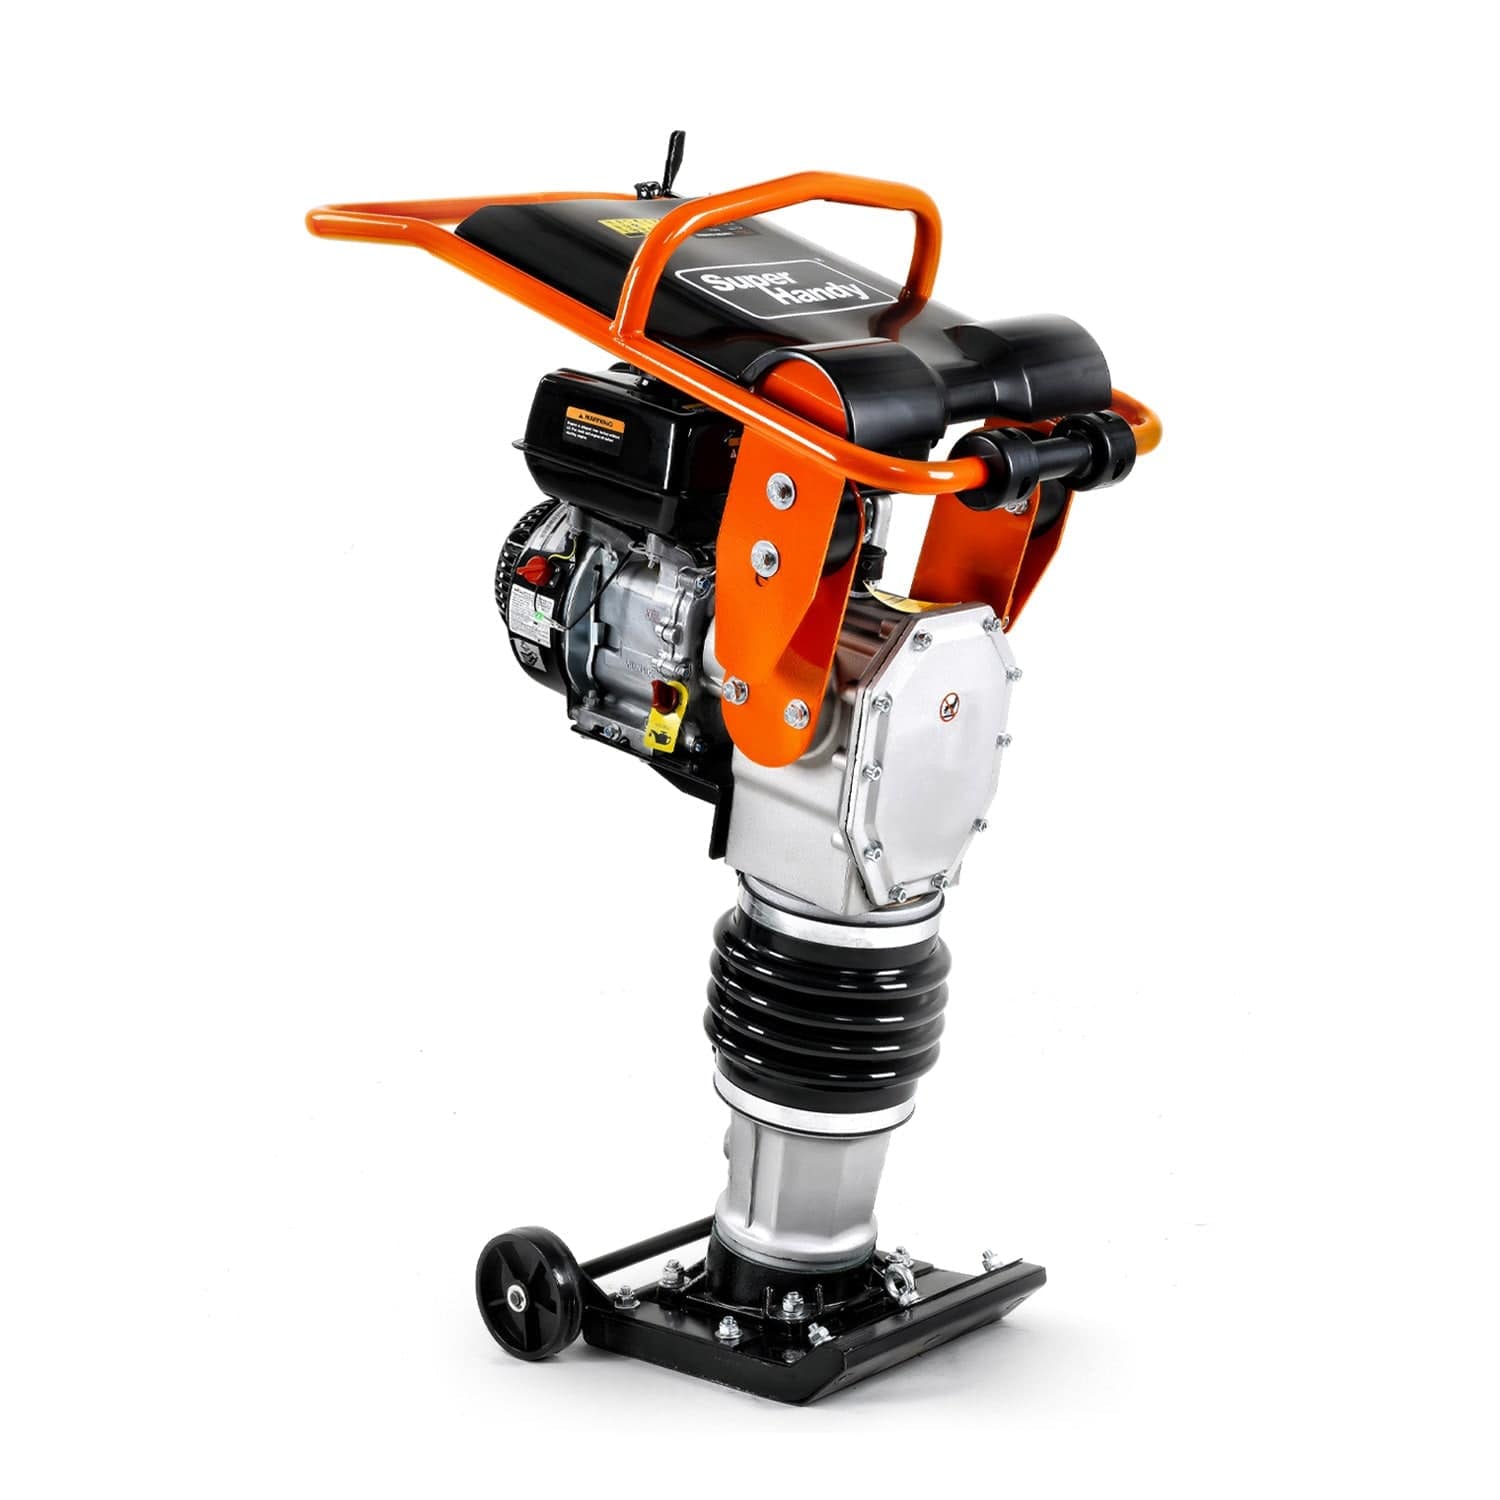 SuperHandy Tamping Rammer Pro - 7HP 209CC Gas Engine High Impact Soil Compaction